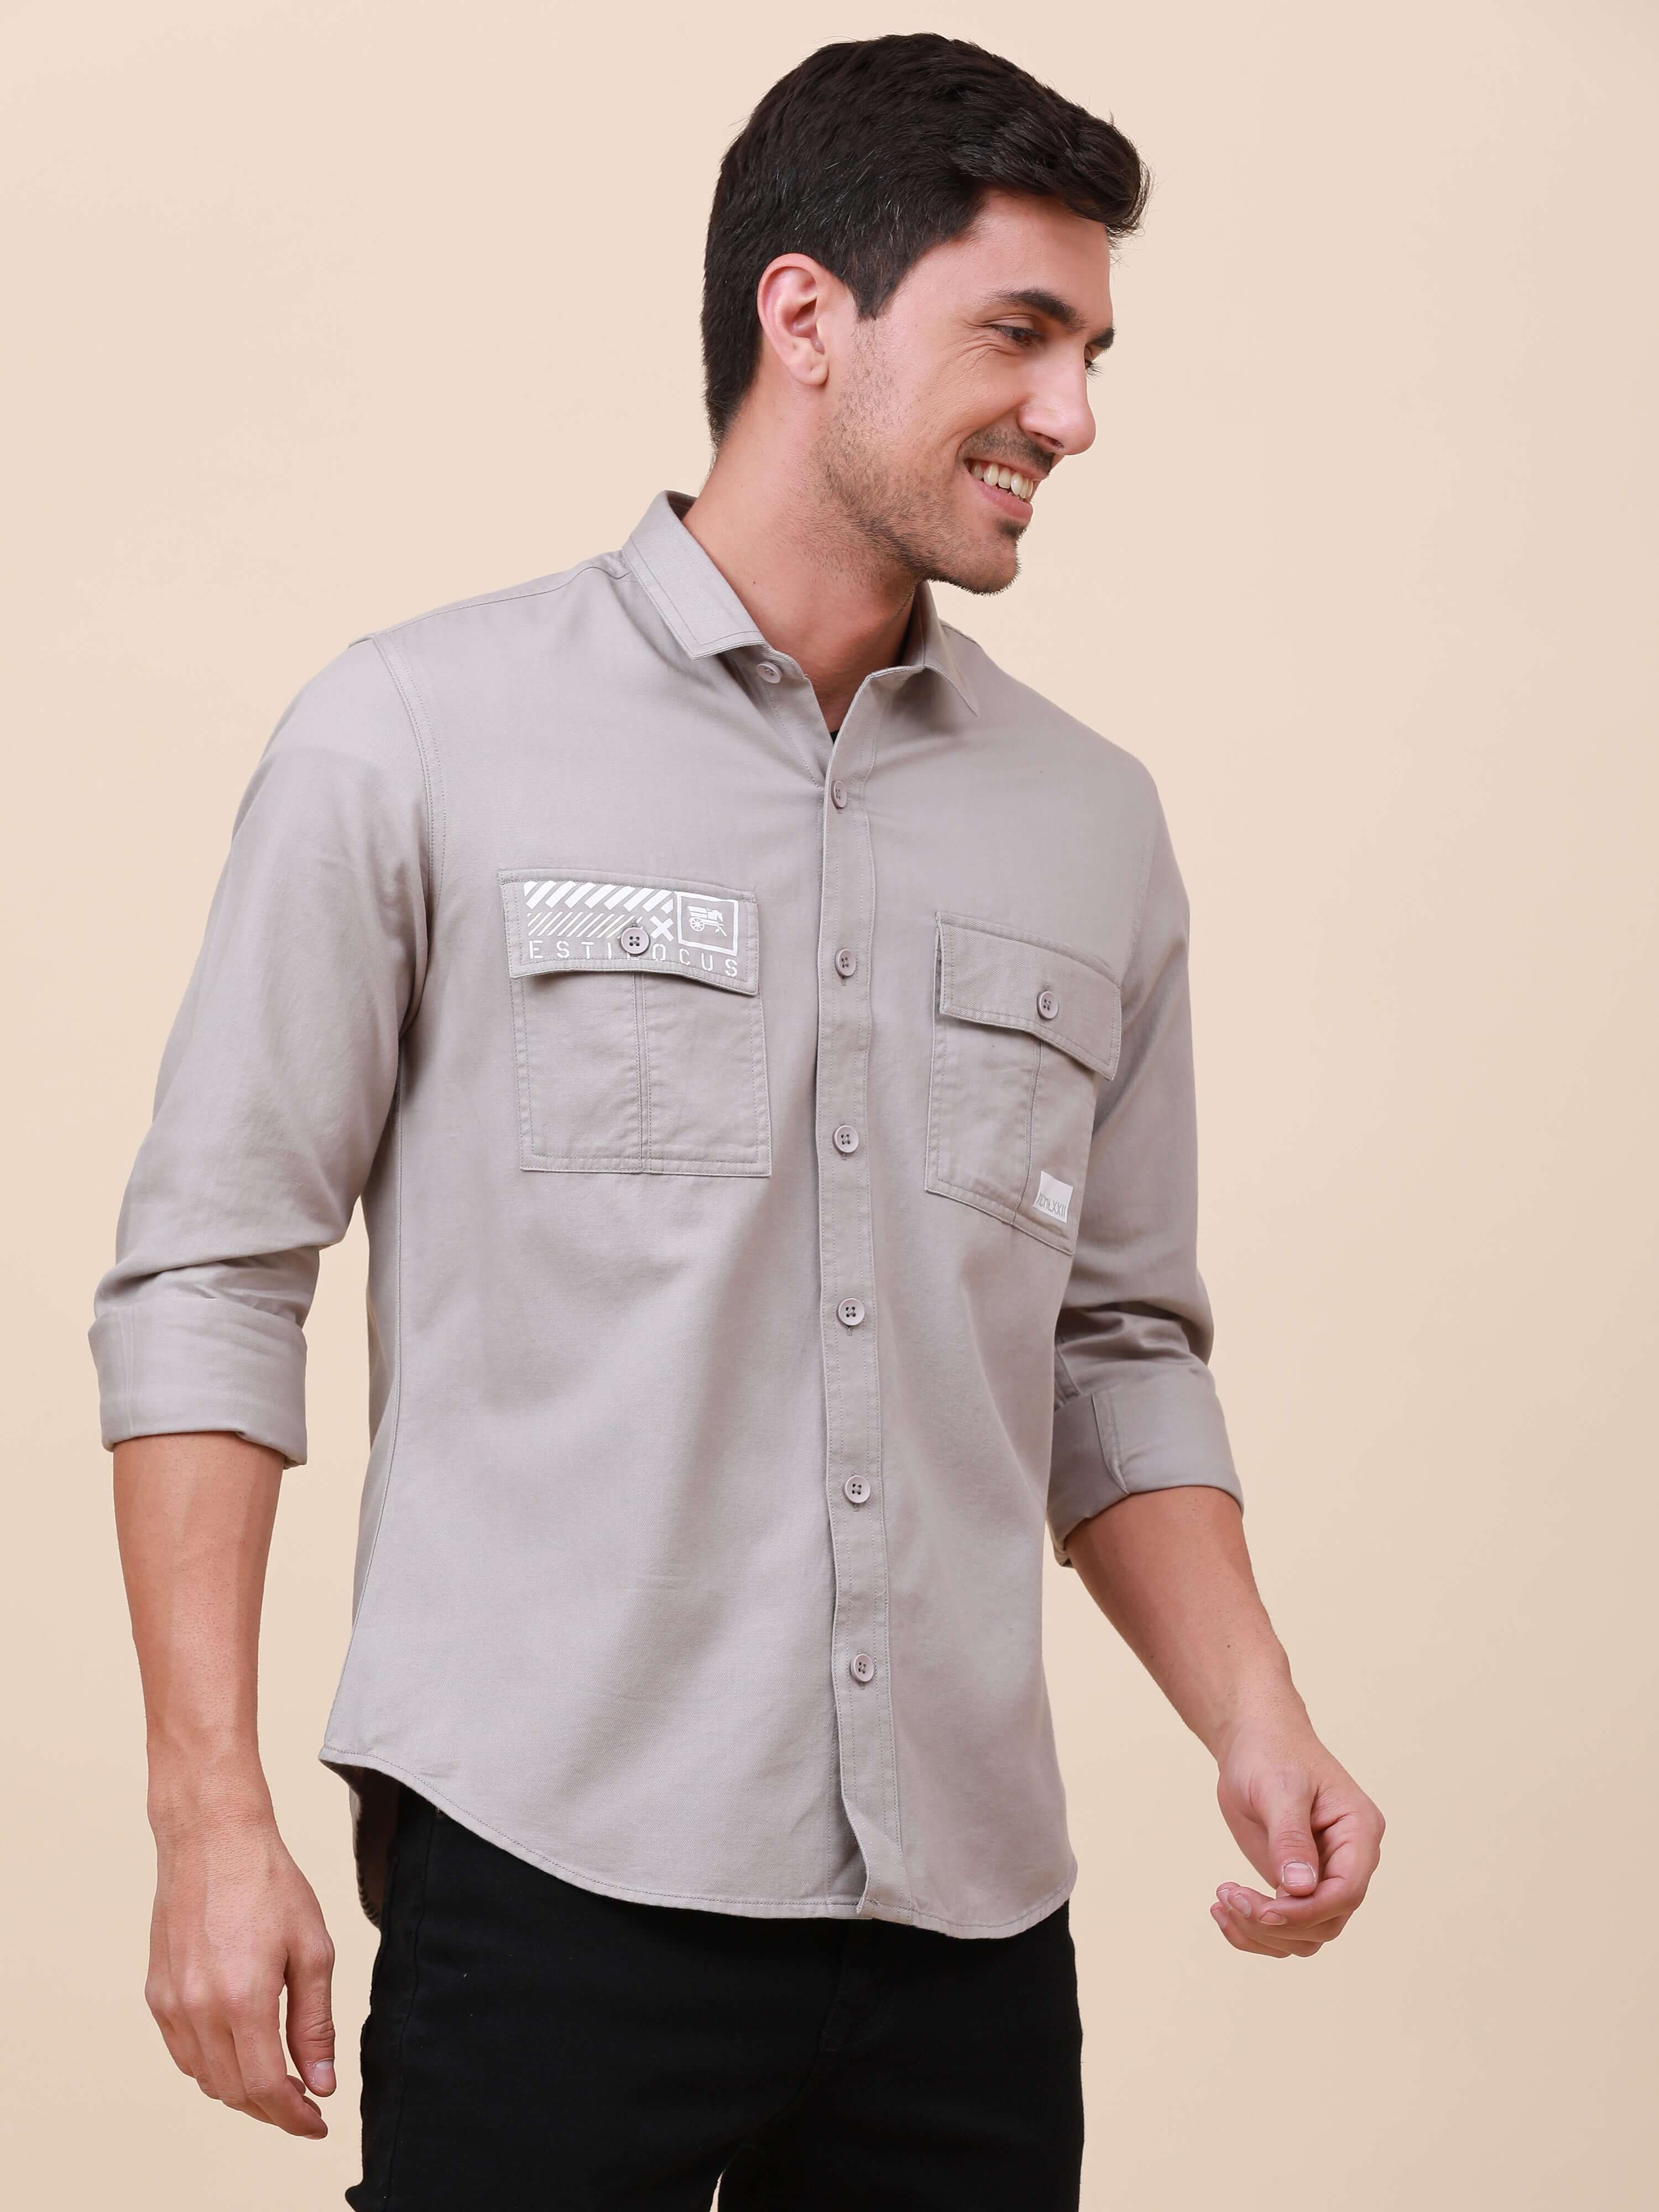 Grey Solid Double Pocket Shirt shop online at Estilocus. 100% Cotton , Full-sleeve solid shirt Cut and sew placket Regular collar Double button edge cuff Double pocket with flap Curved bottom hemline Finest printing at pocket . All double needle construct